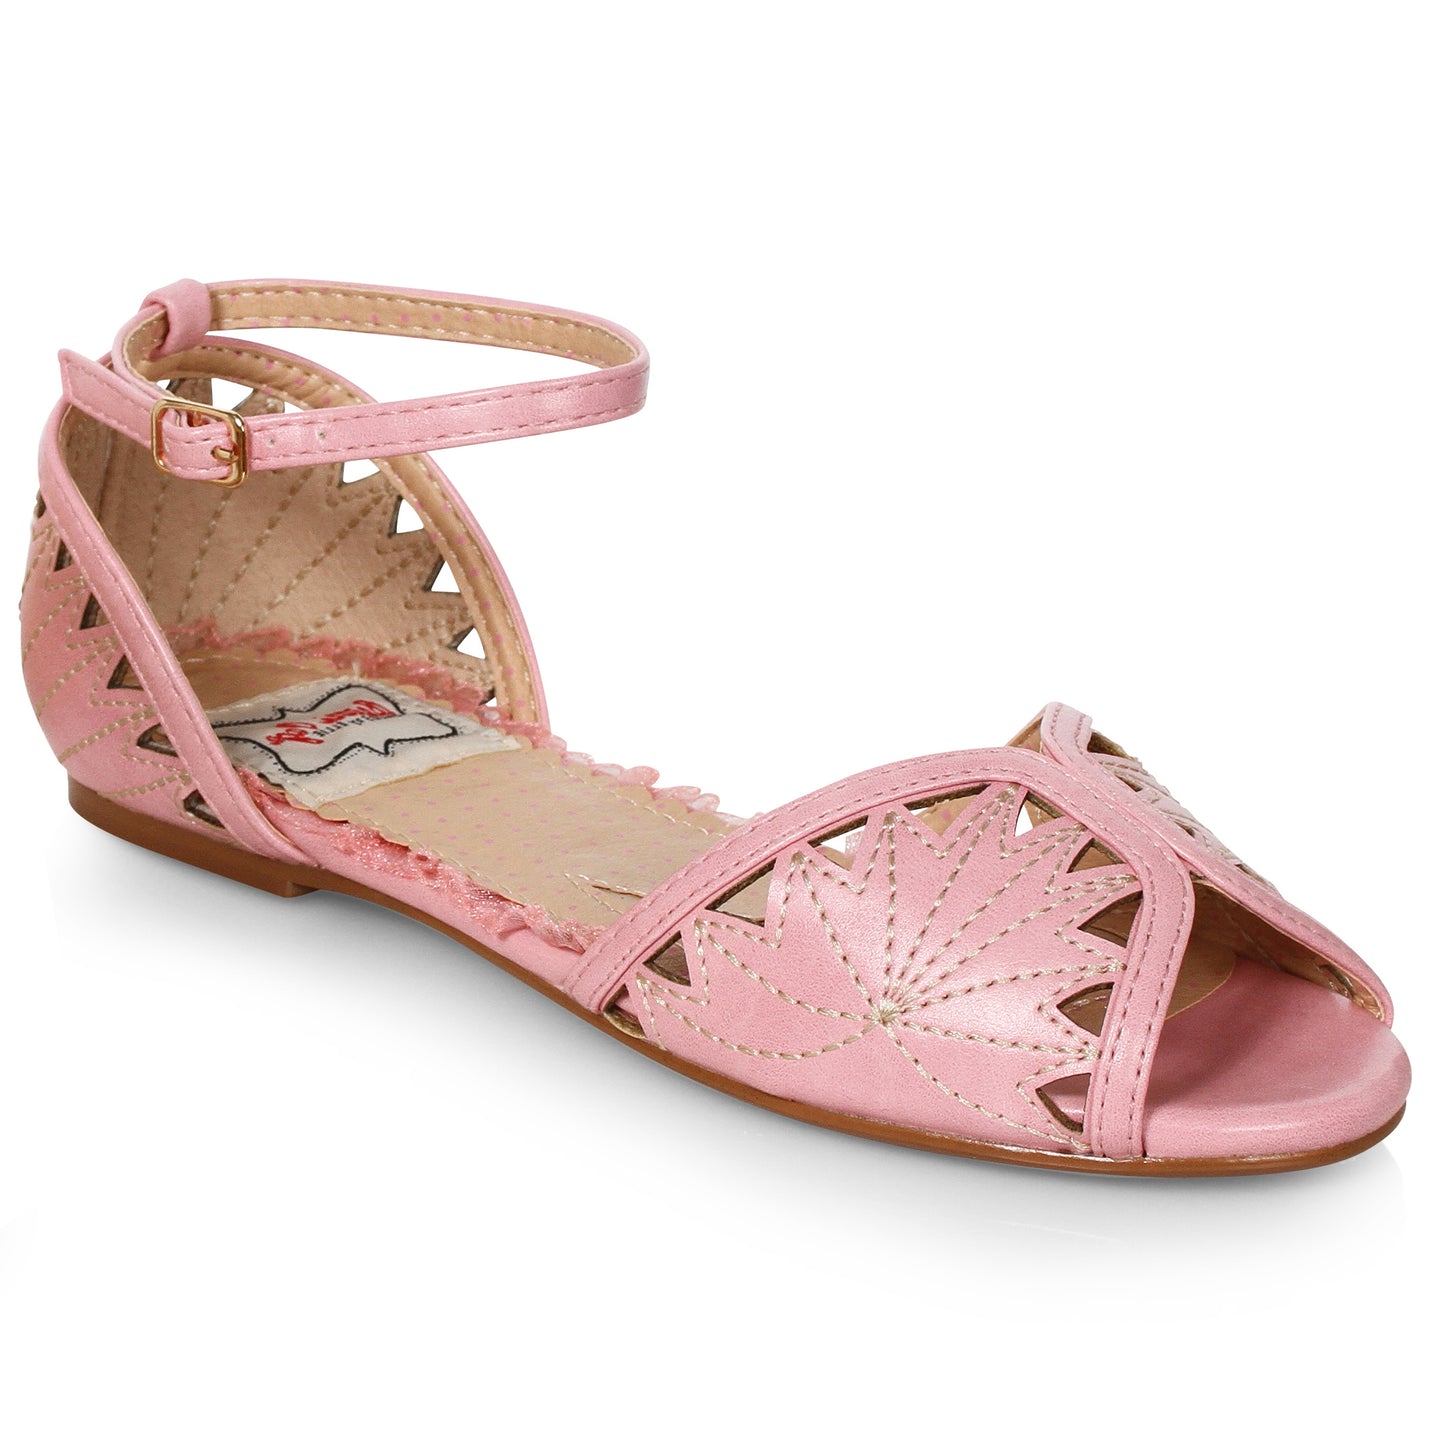 BP100-AGNES  Flat Sandals With Strap And Detailed Stitching VINTAGE/RE FLATS